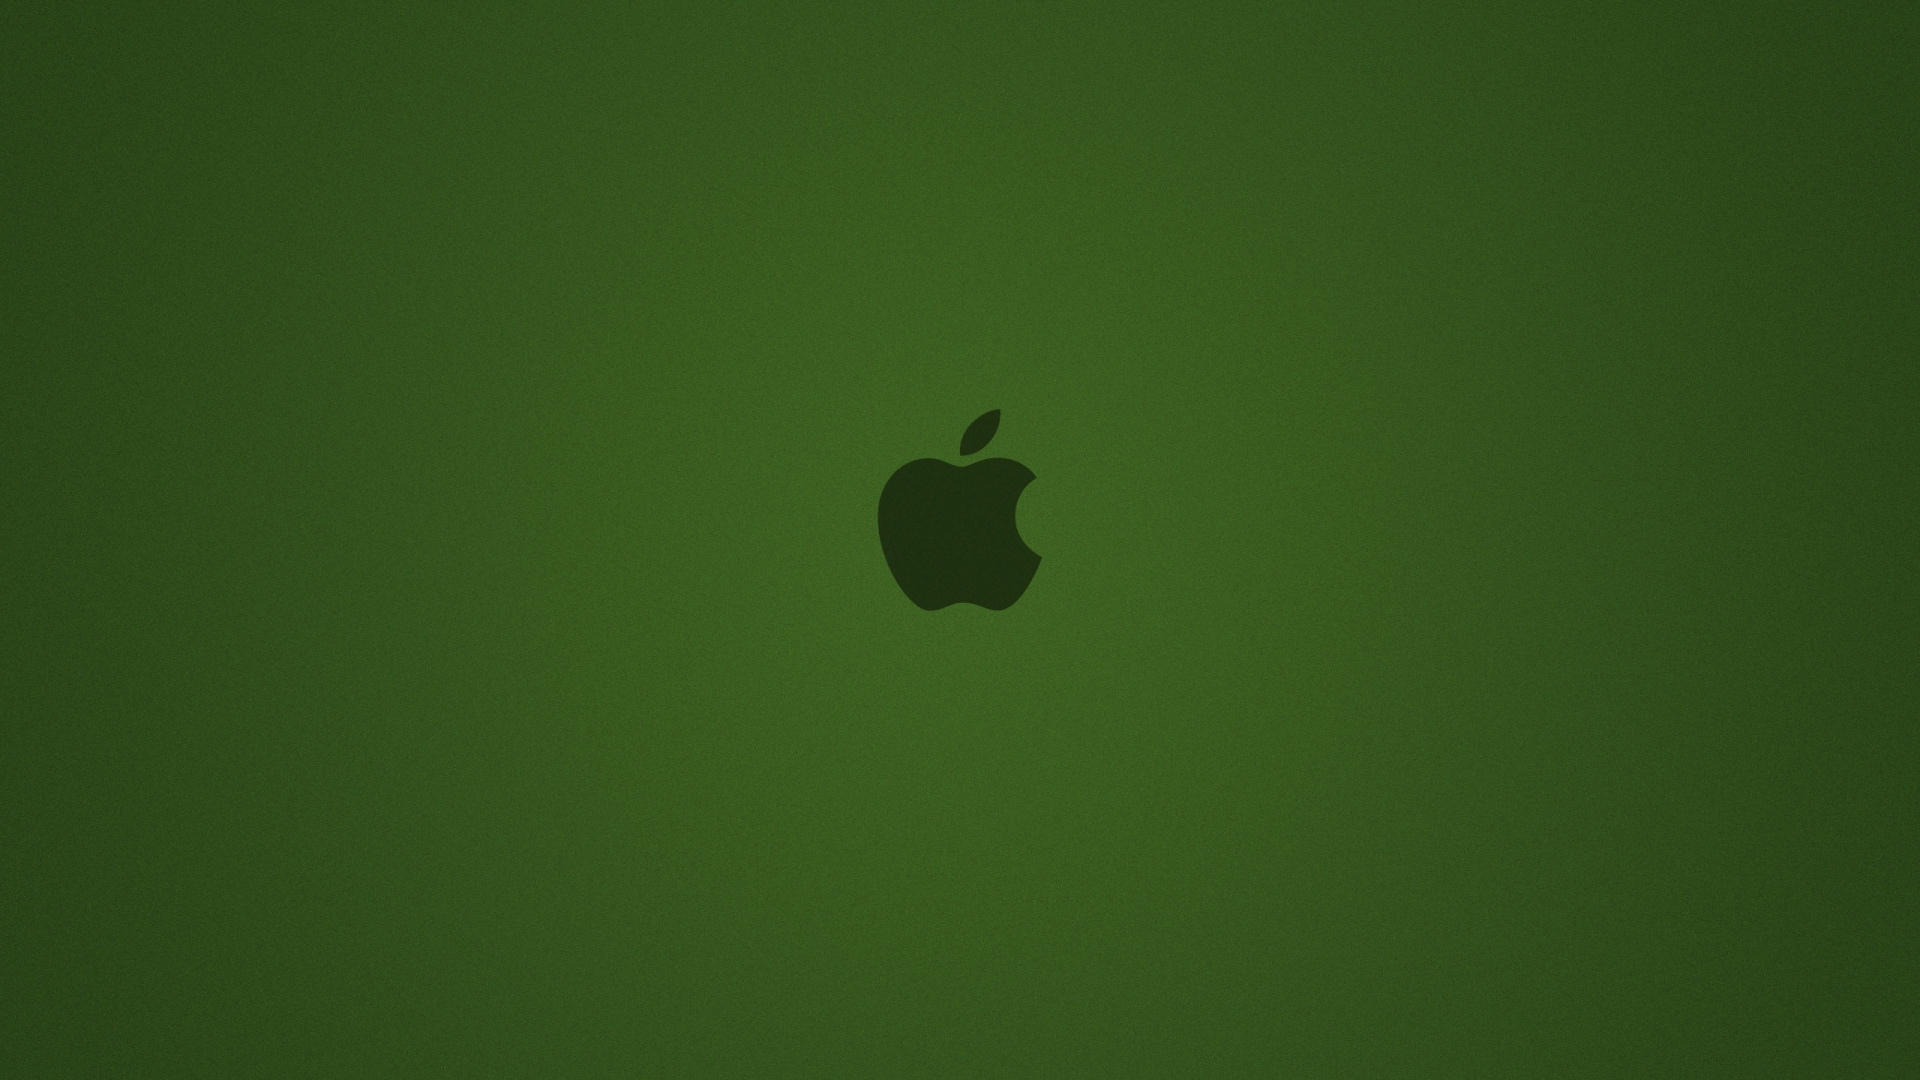 Apple Logo on Green Surface. Wallpaper in 1920x1080 Resolution